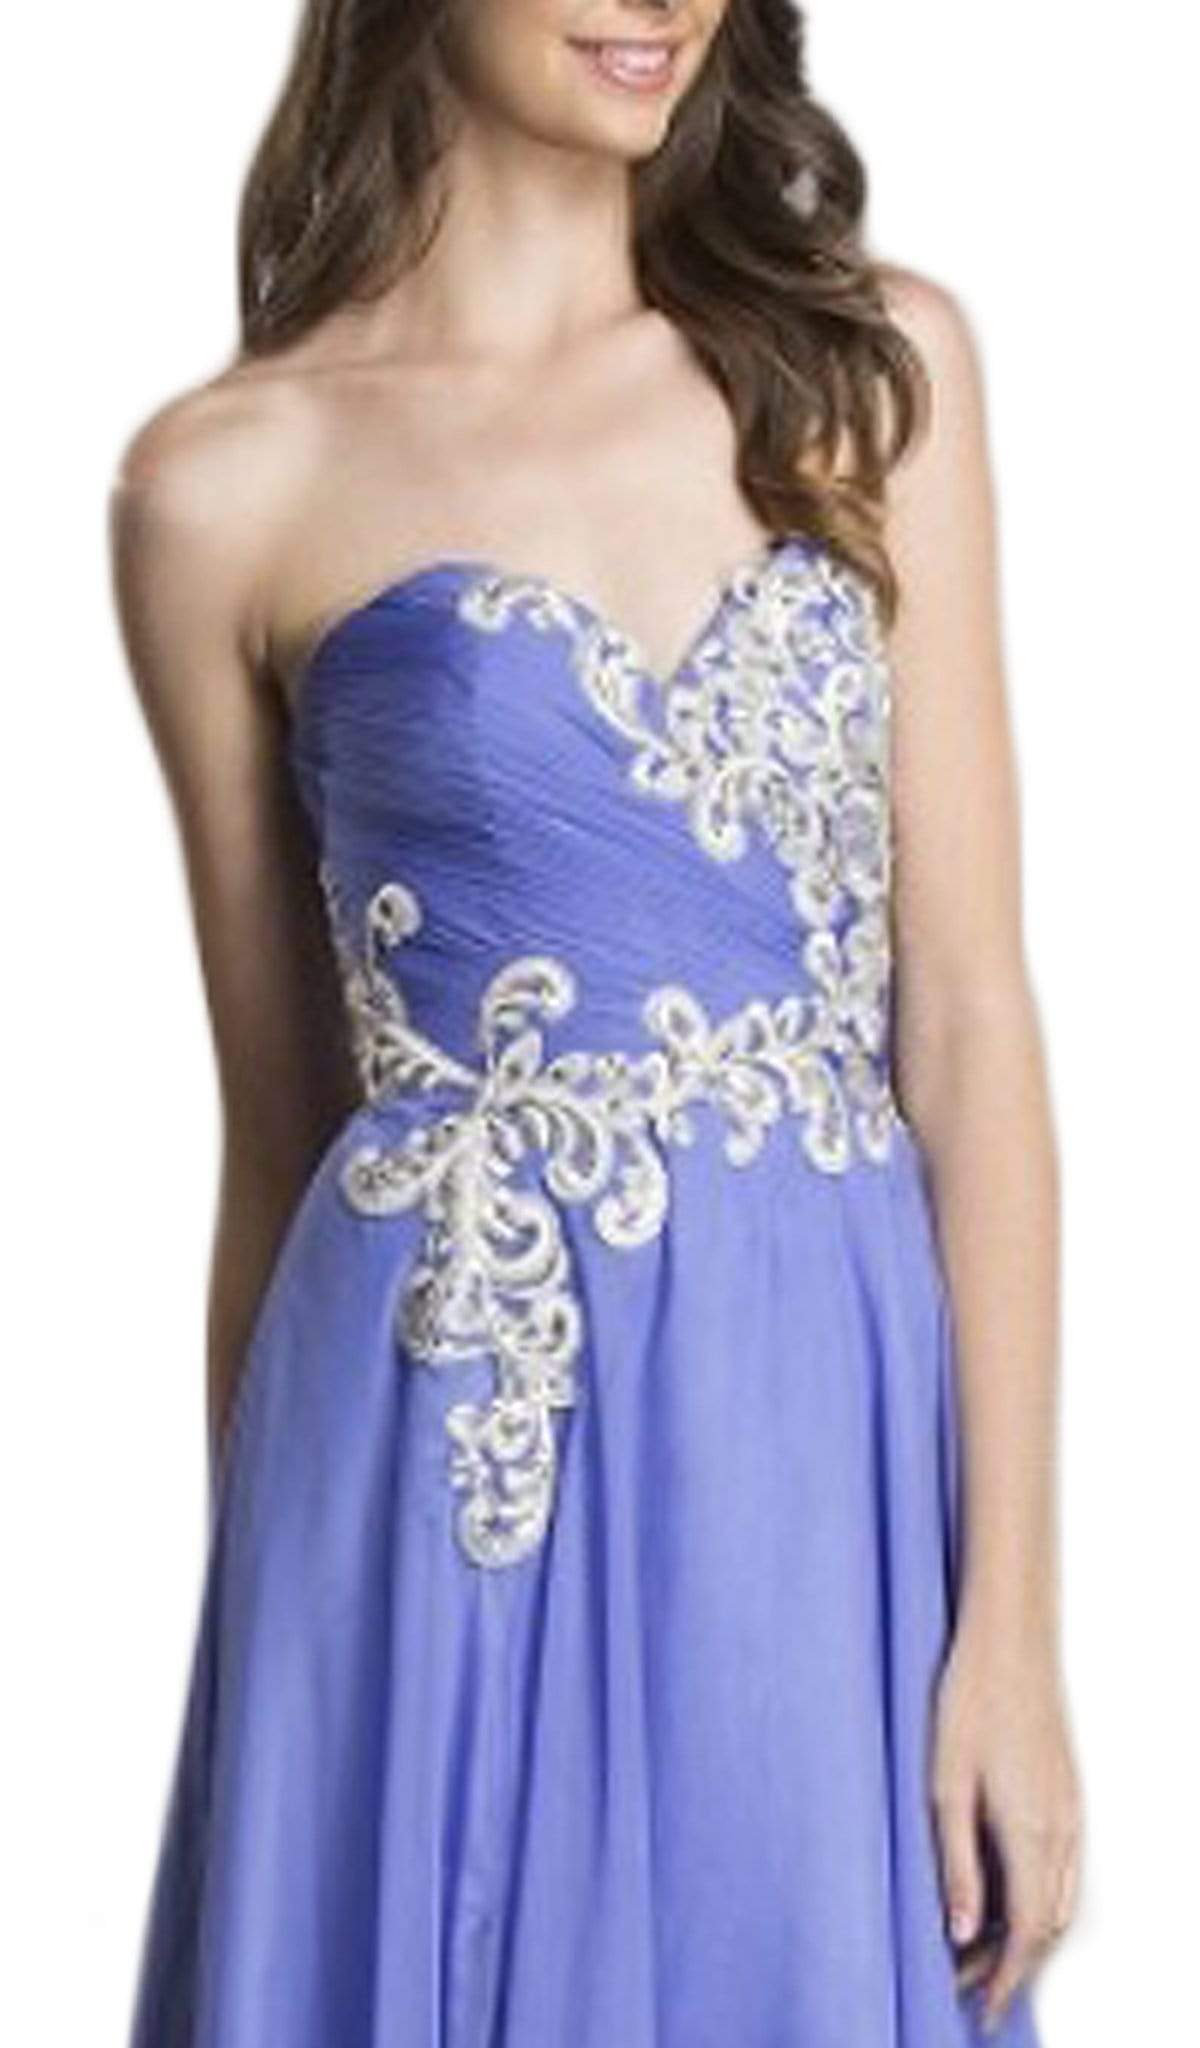 Strapless Ruched A-Line Evening Gown Dress